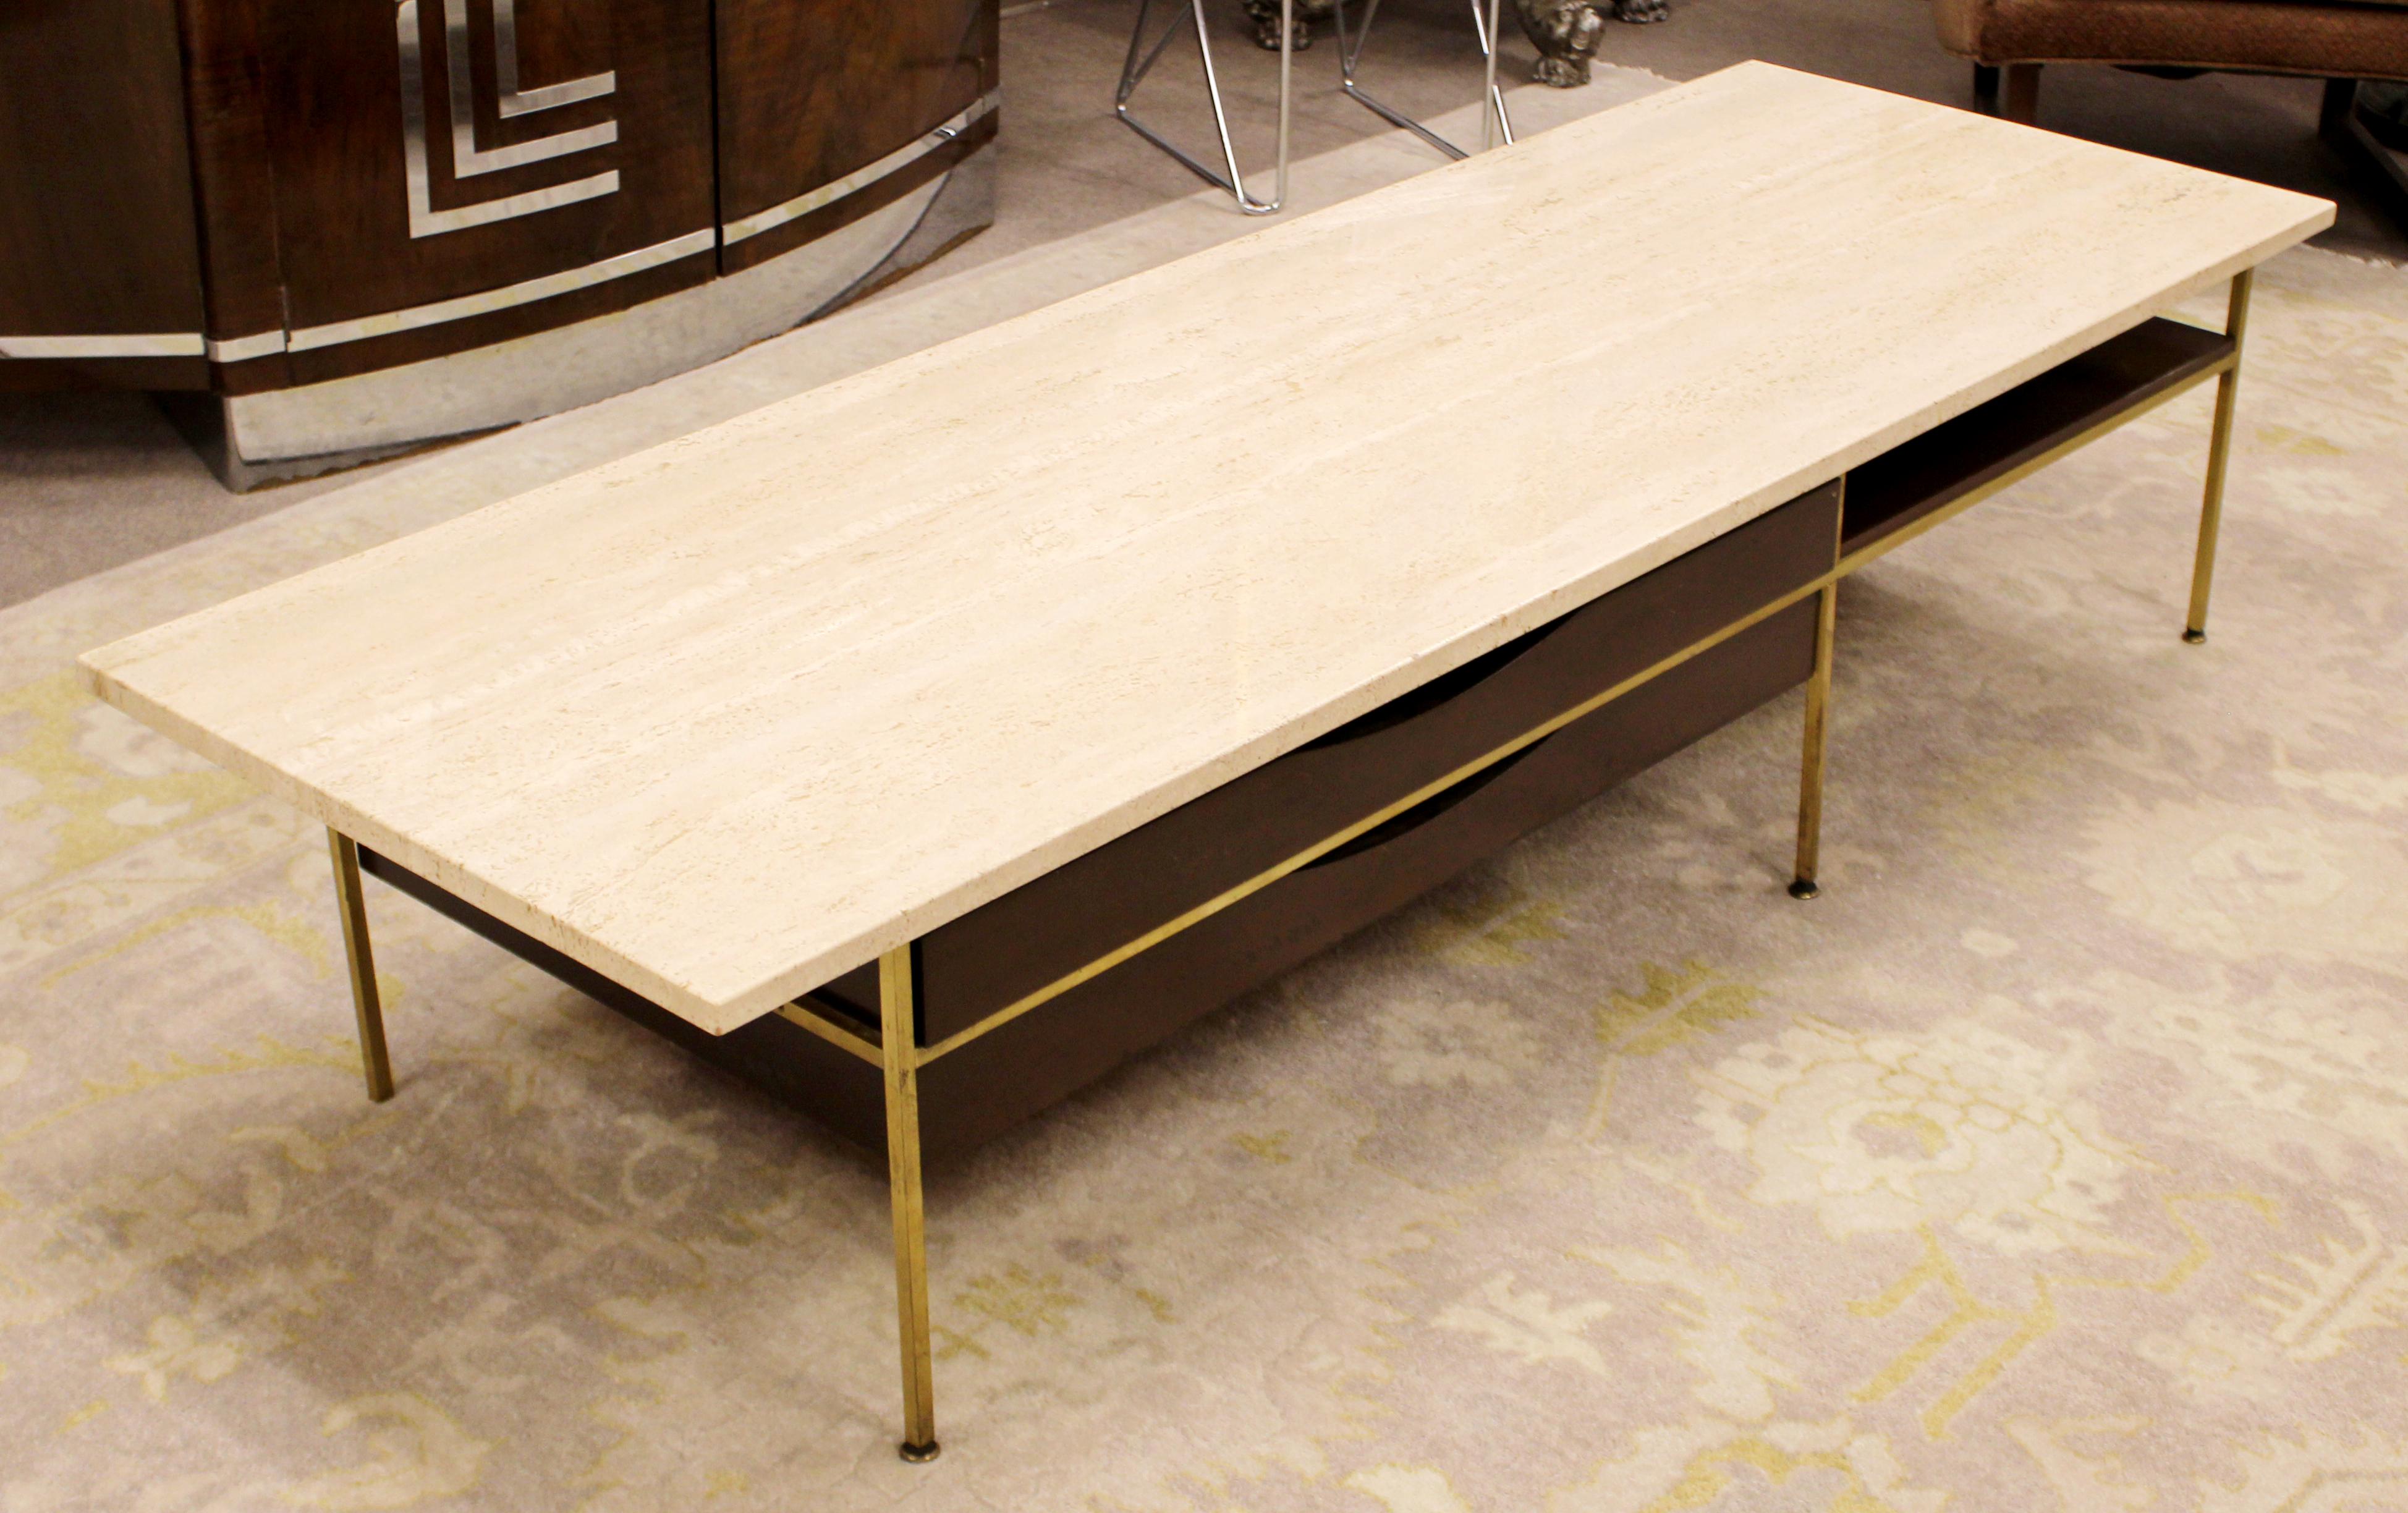 For your consideration is a striking, Travertine topped coffee table, with a brass and wood base, by Paul McCobb, circa 1960s. In excellent vintage condition. The dimensions are 72